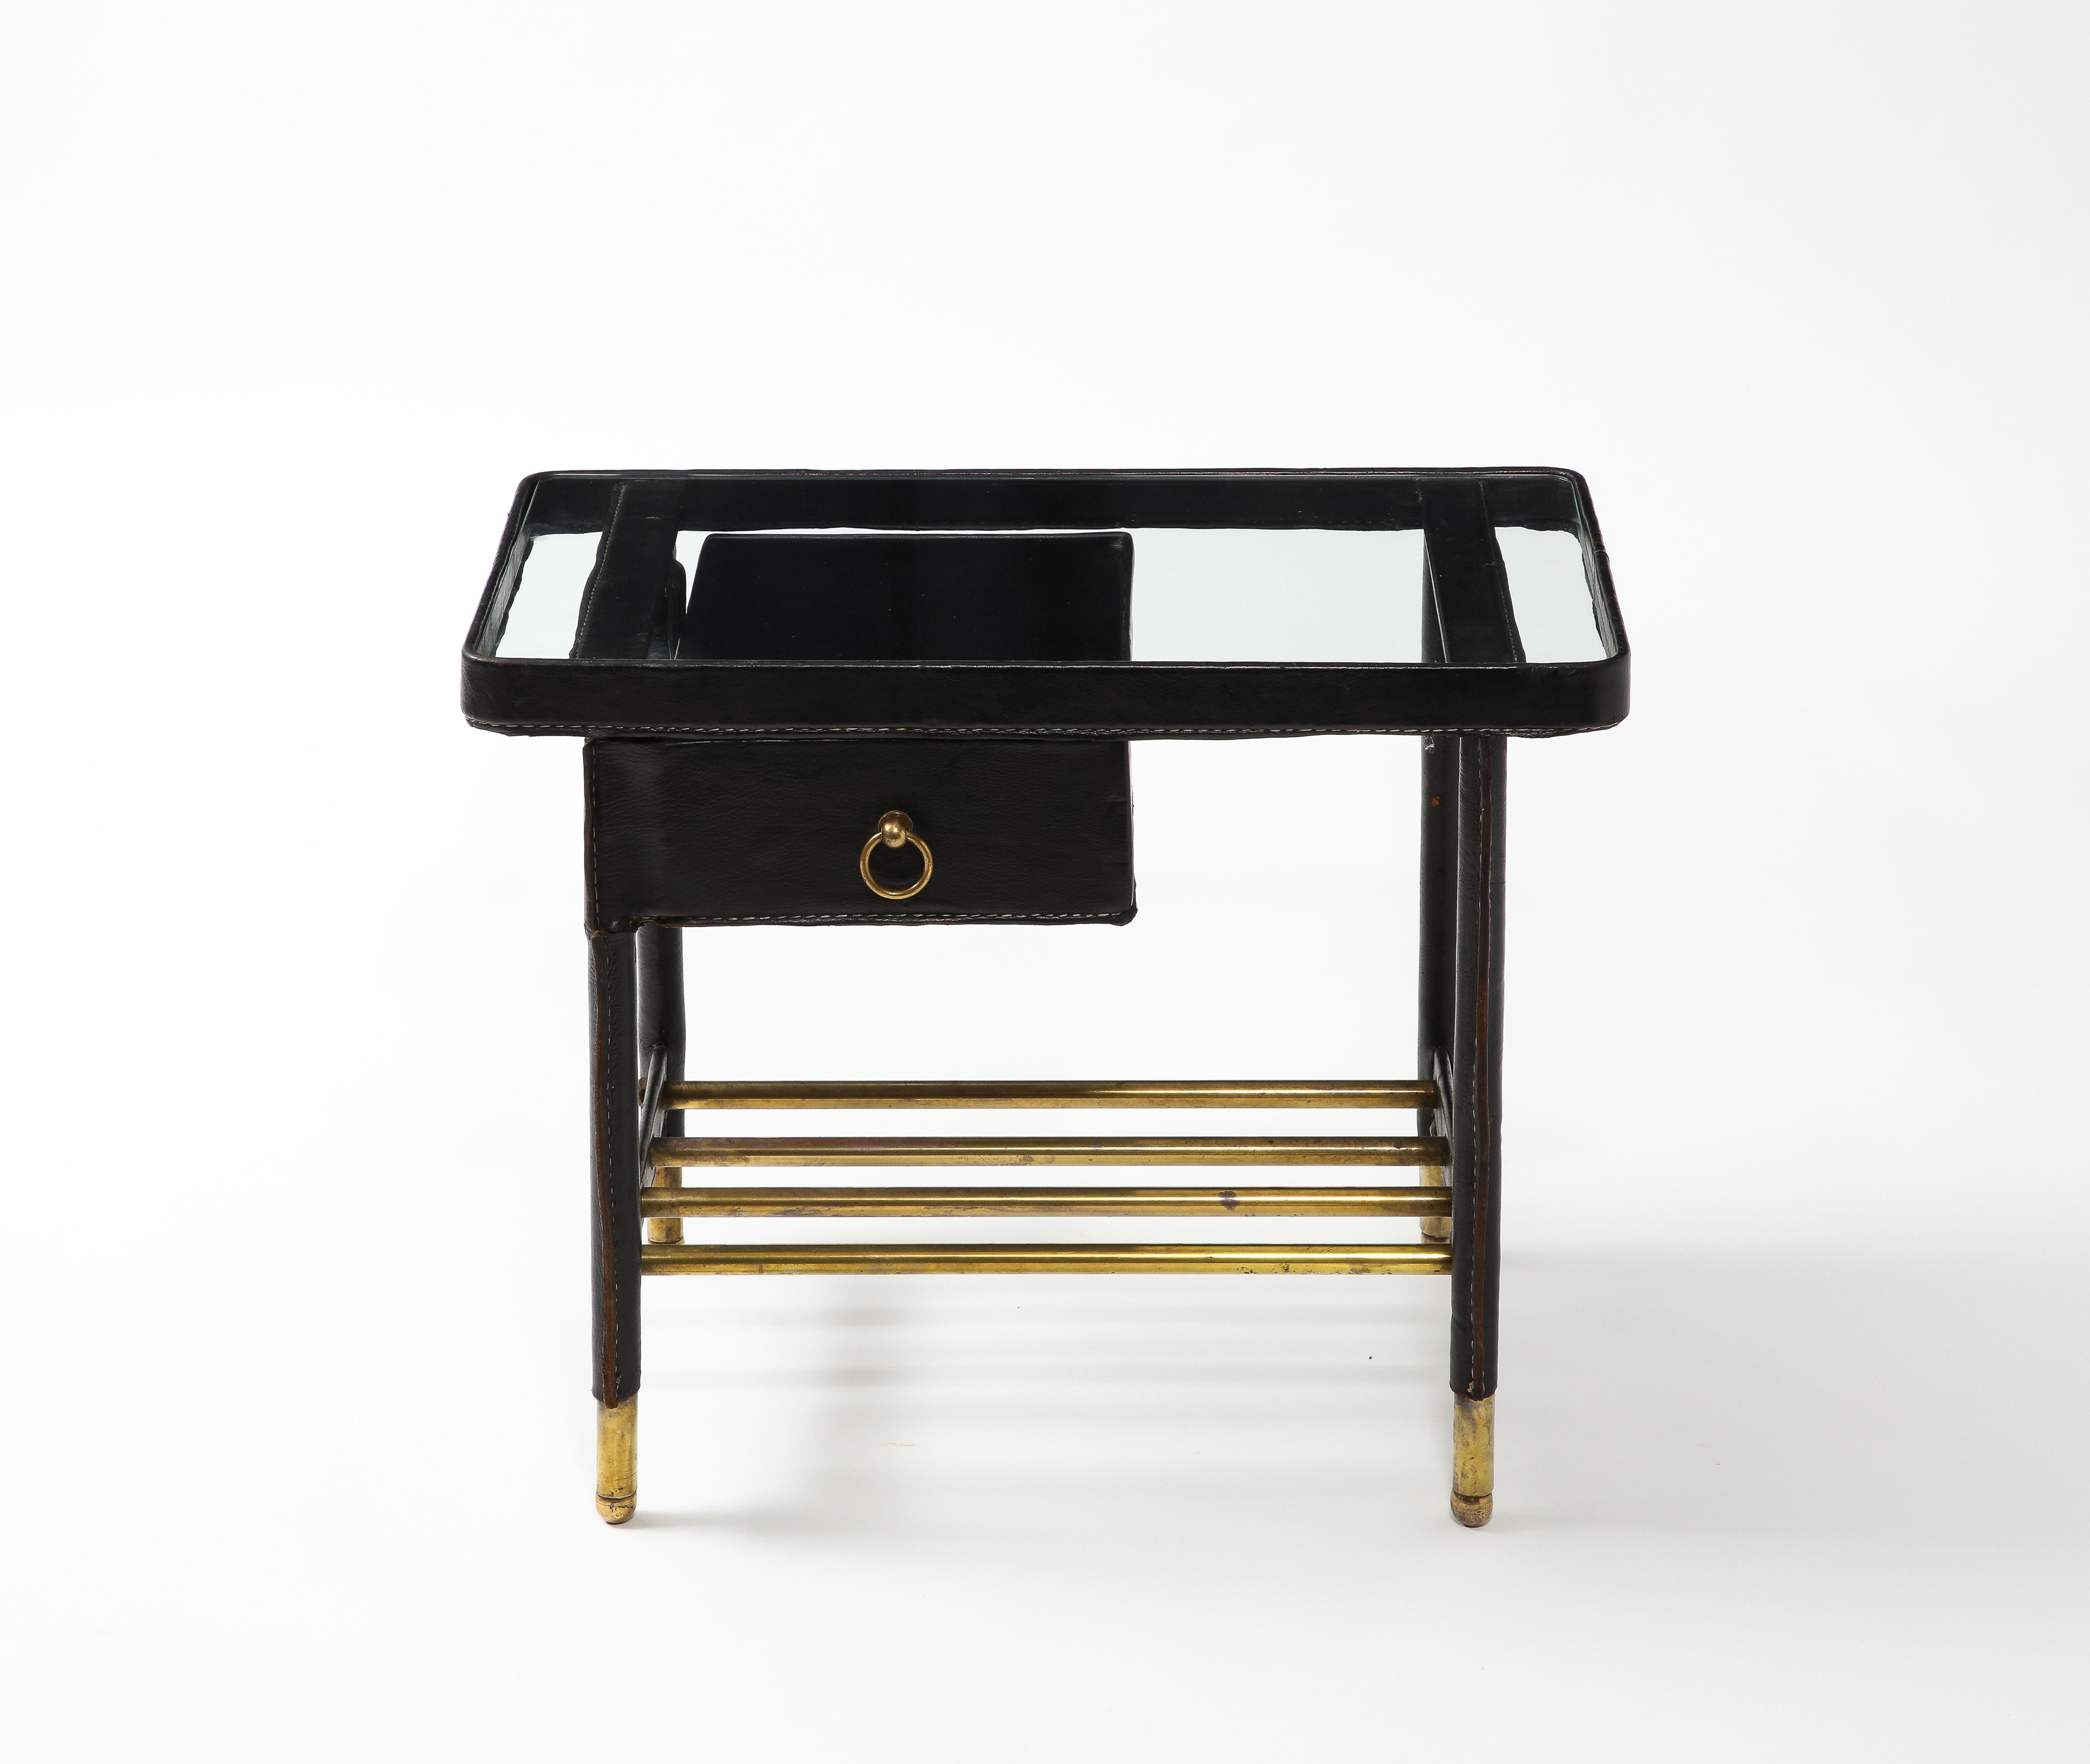 End table in leather and brass with a glass top and a drawer that swivels out.